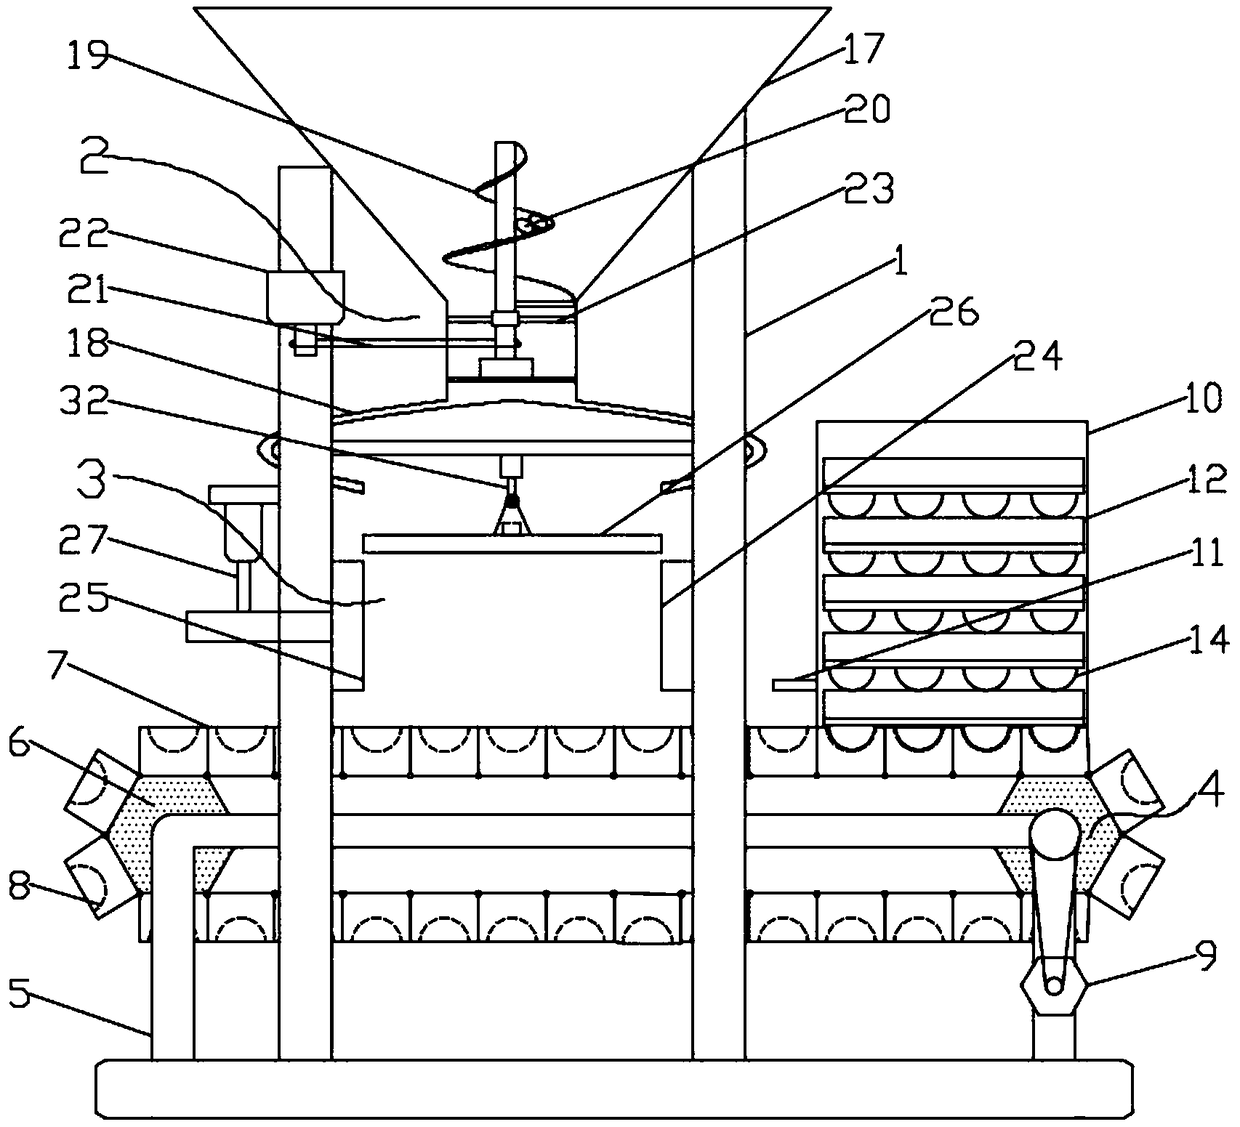 Full-automatic production equipment for building prefabricated parts and manufacturing process of building prefabricated parts